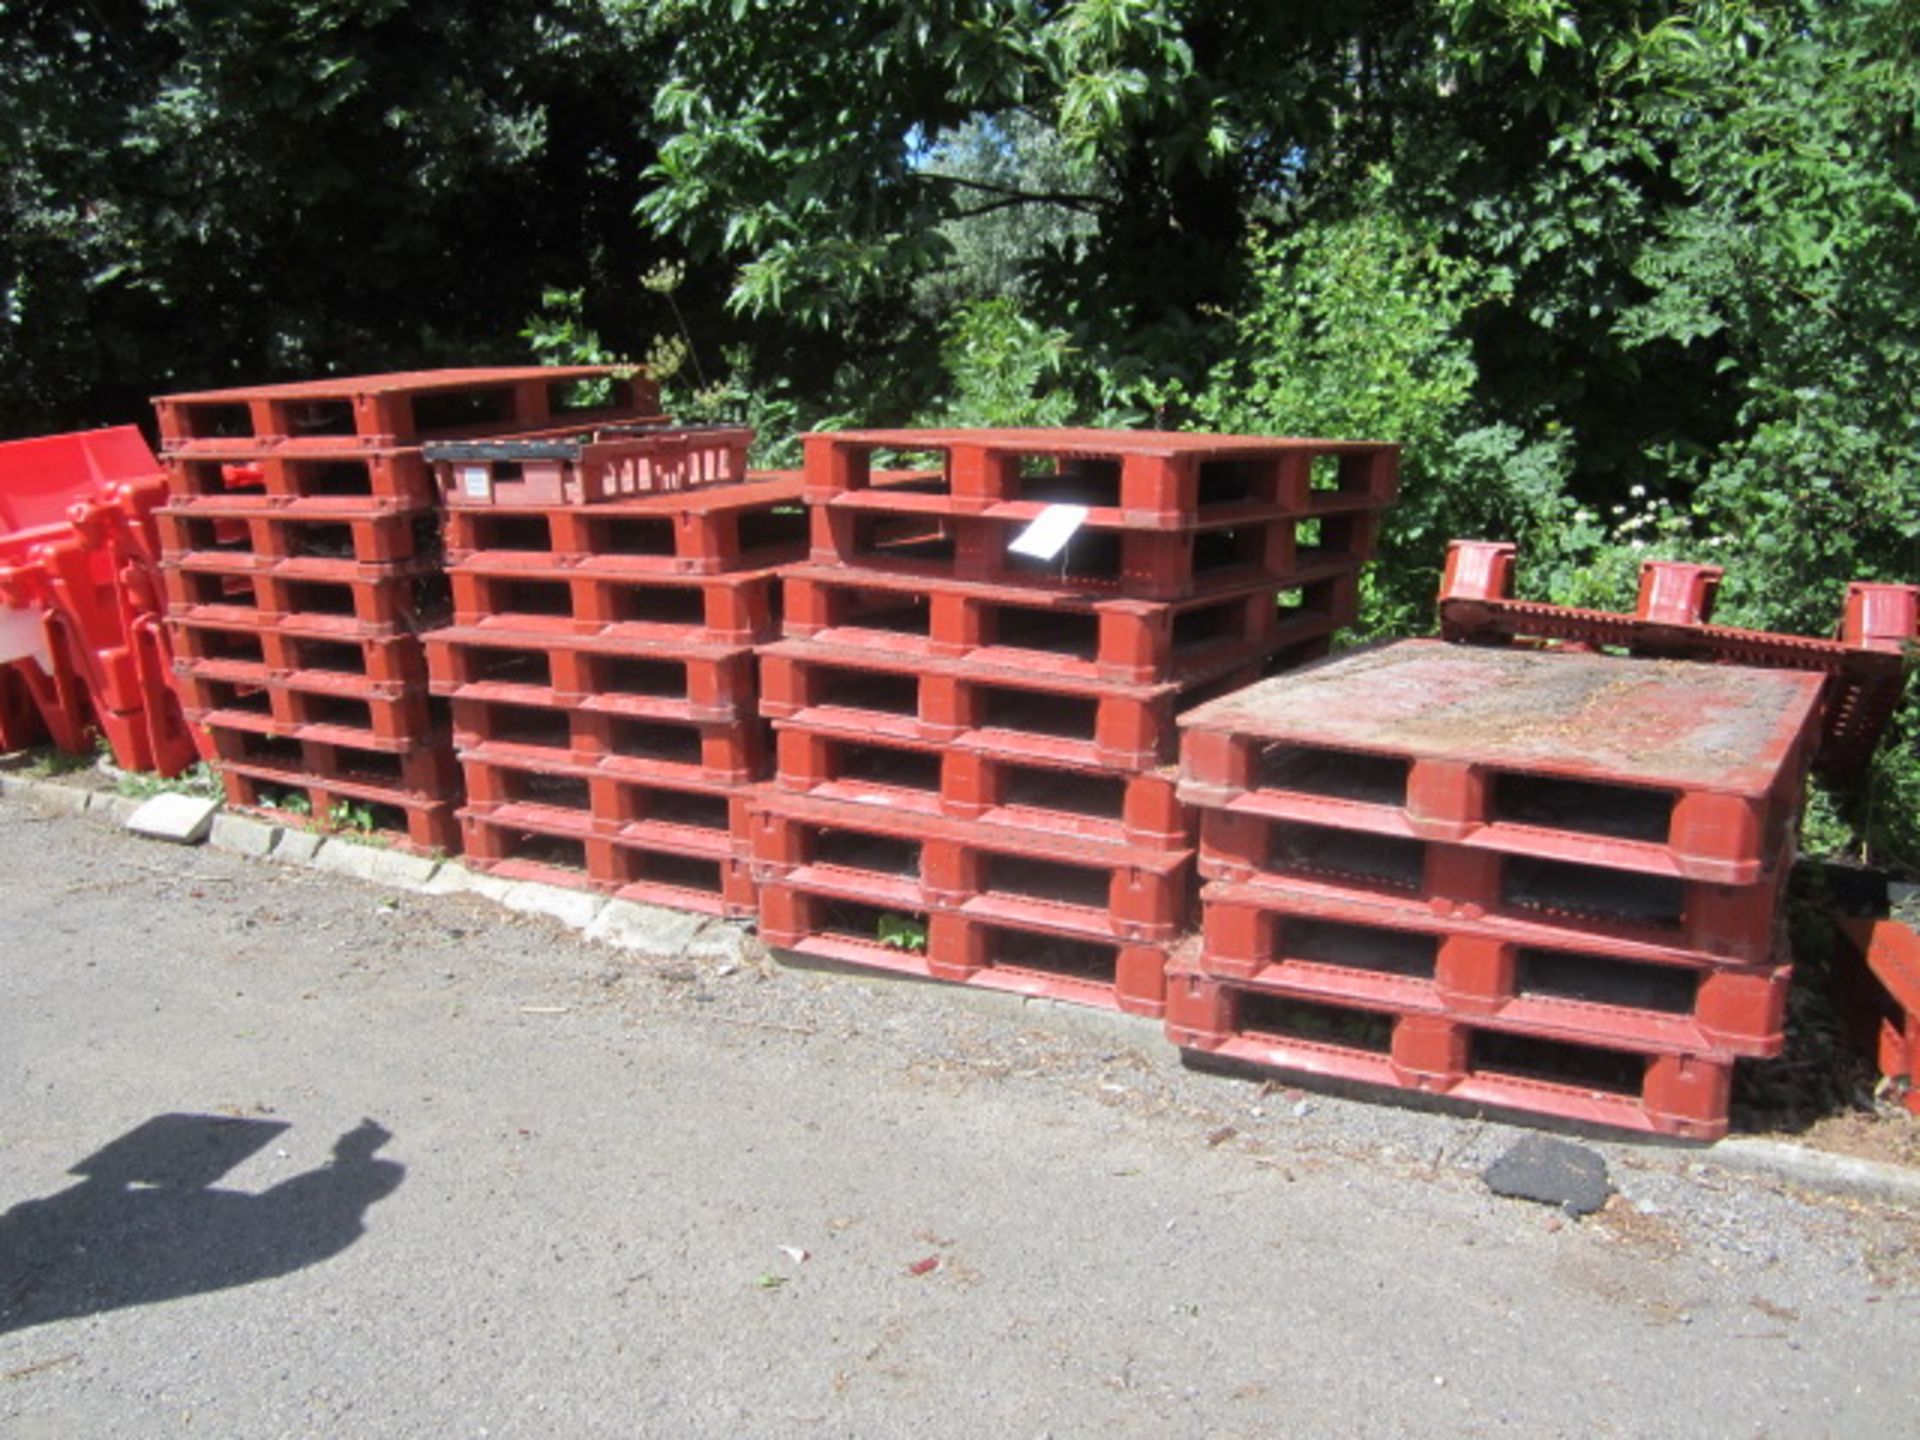 Approximately 23 x Alibert Jumbopal plastic pallets, 1200mm x 1000mm. - Lift out charge to be